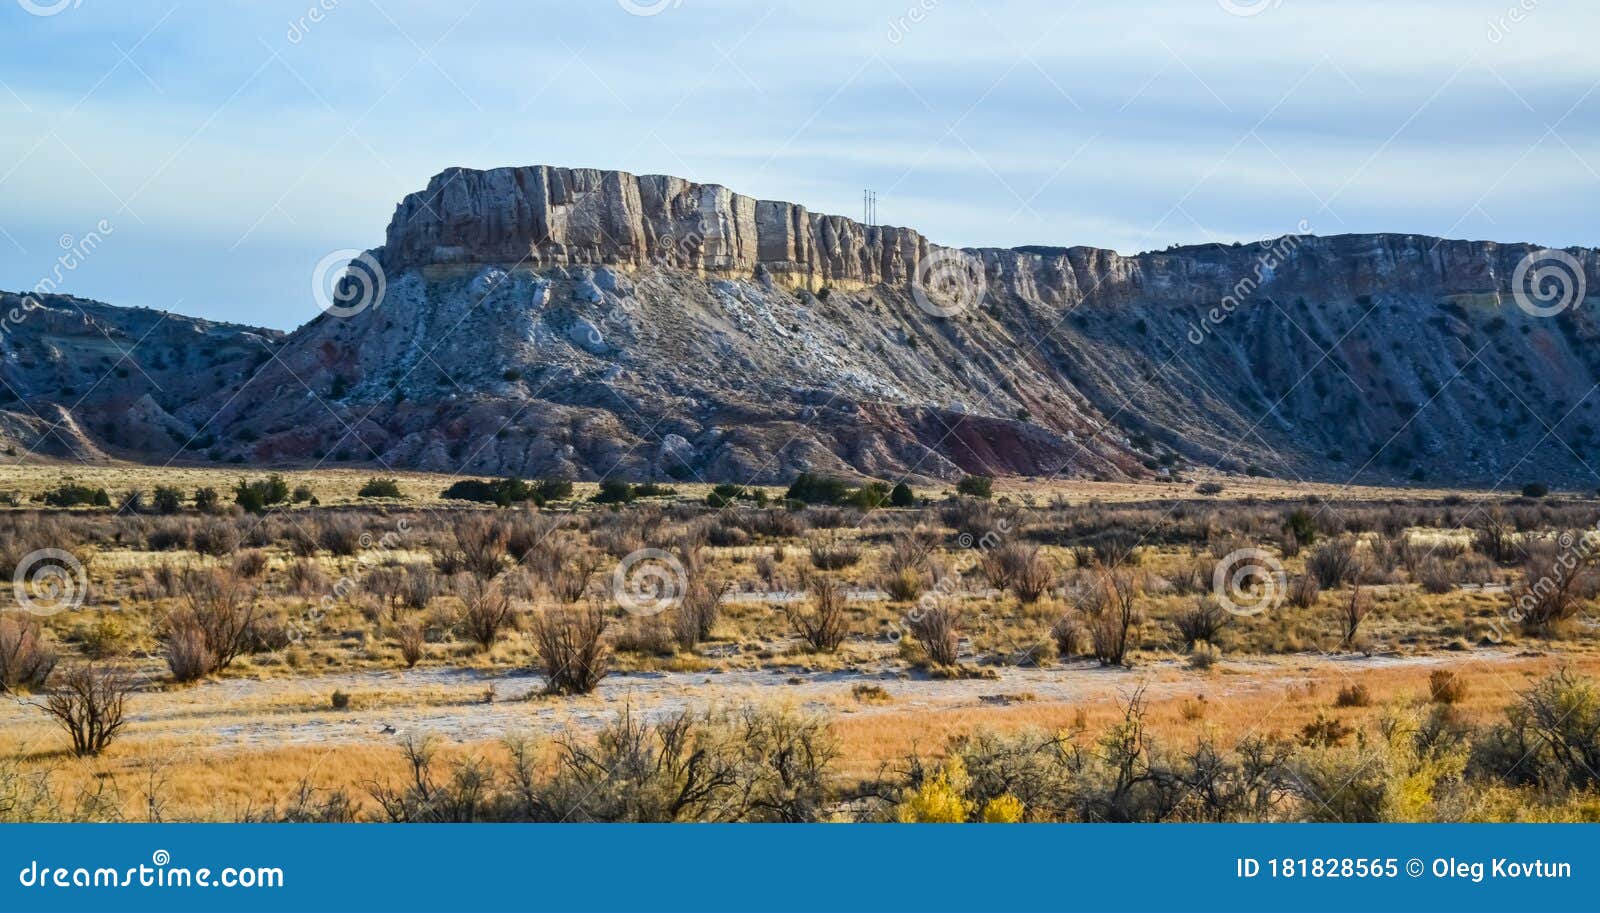 natural landscape, erosive rock formations in new mexico